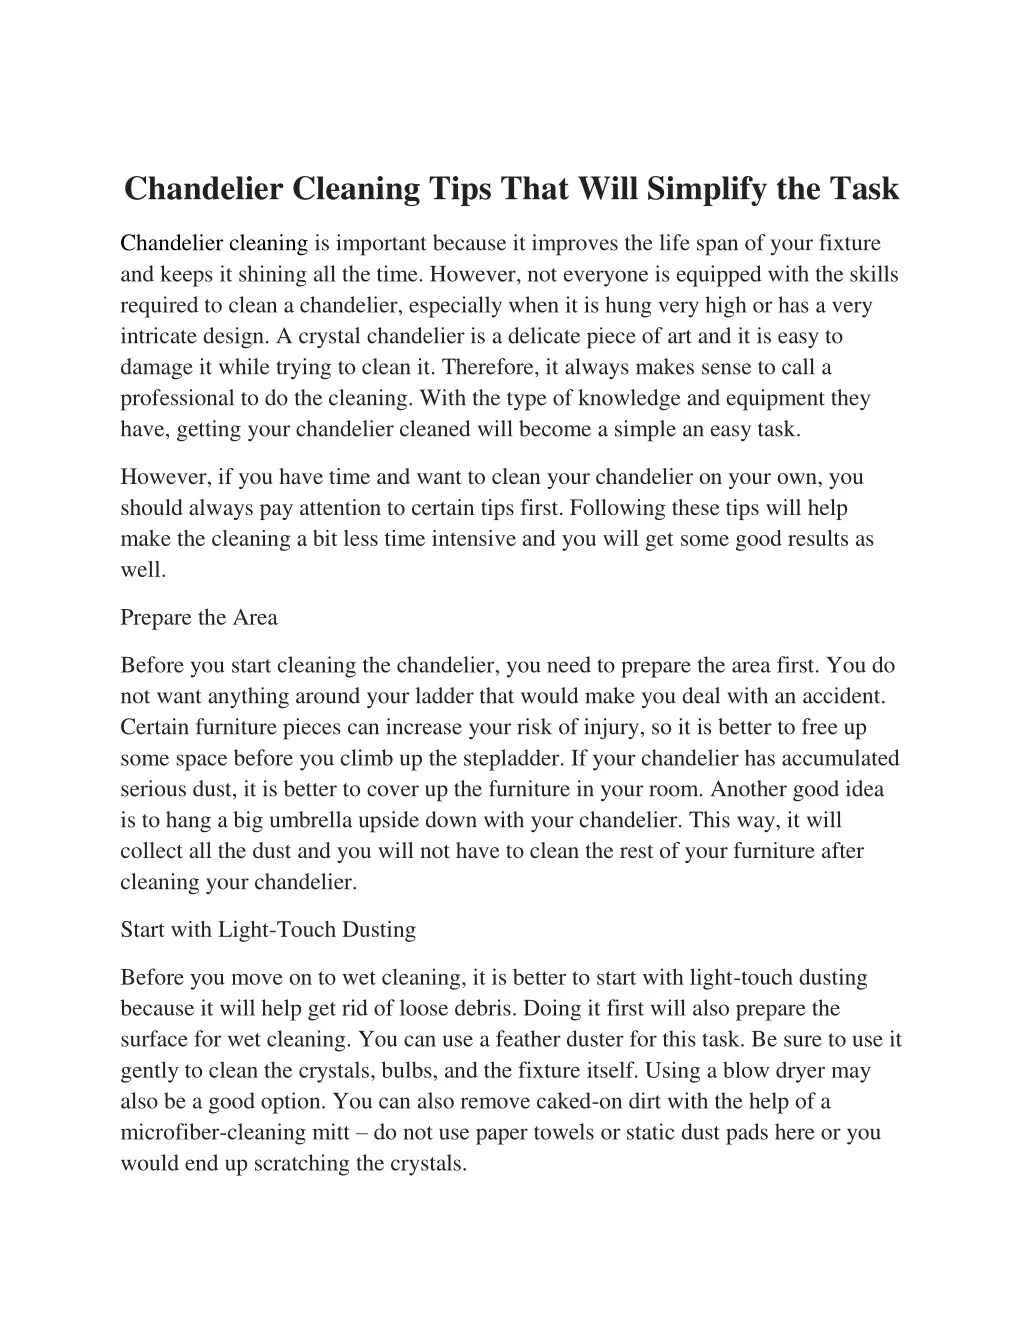 chandelier cleaning tips that will simplify